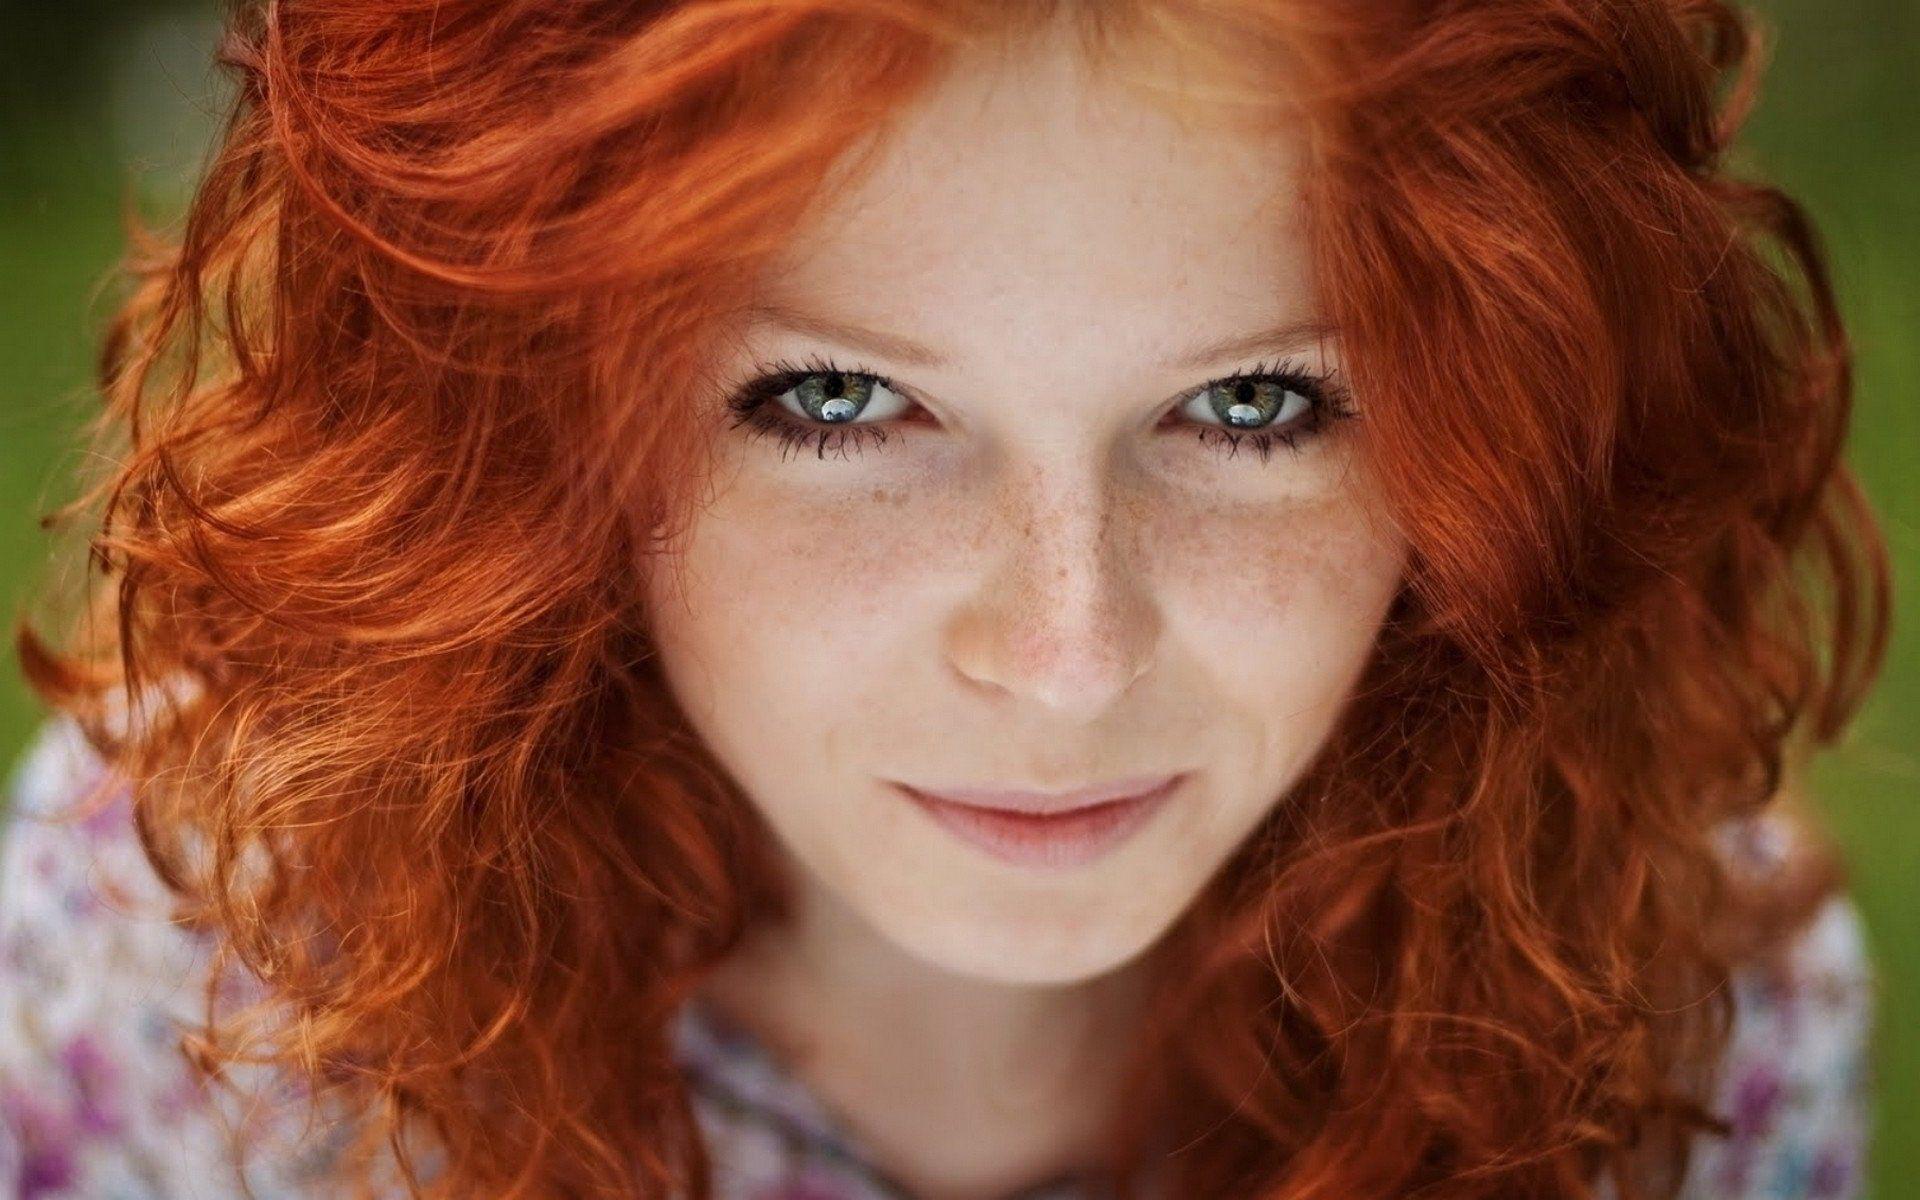 Quest recommendet redhead Free hd